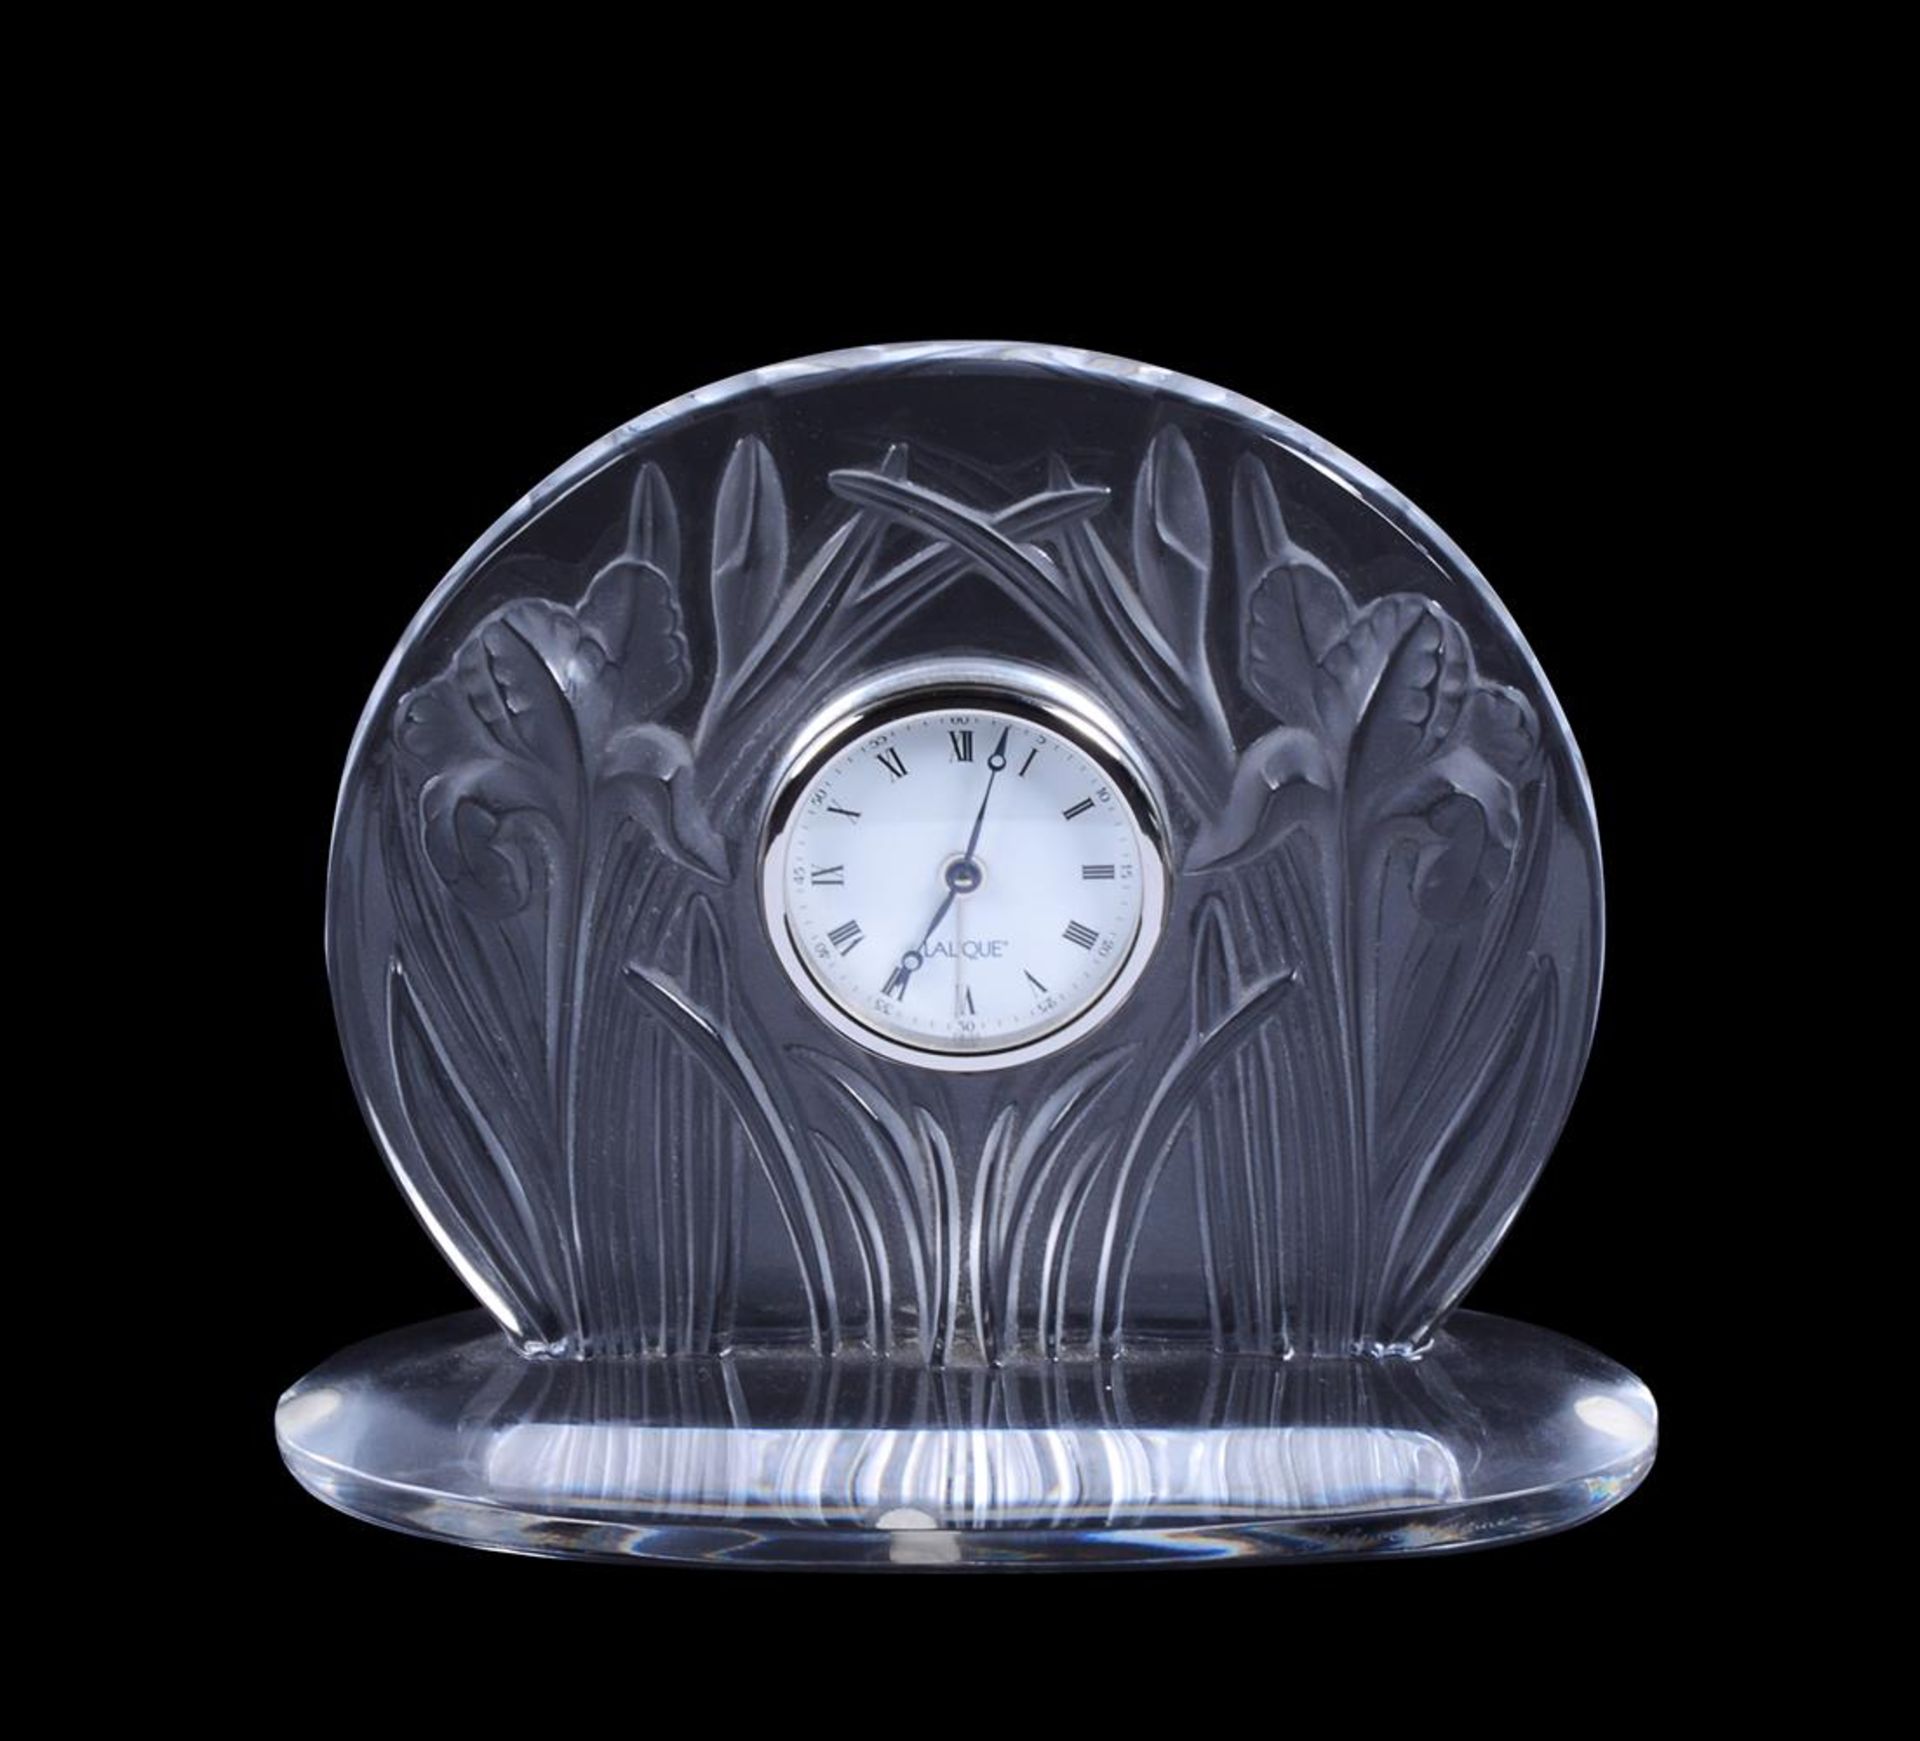 LALIQUE, CRYSTAL LALIQUE, IRIS, A CLEAR AND FROSTED GLASS TIMEPIECE